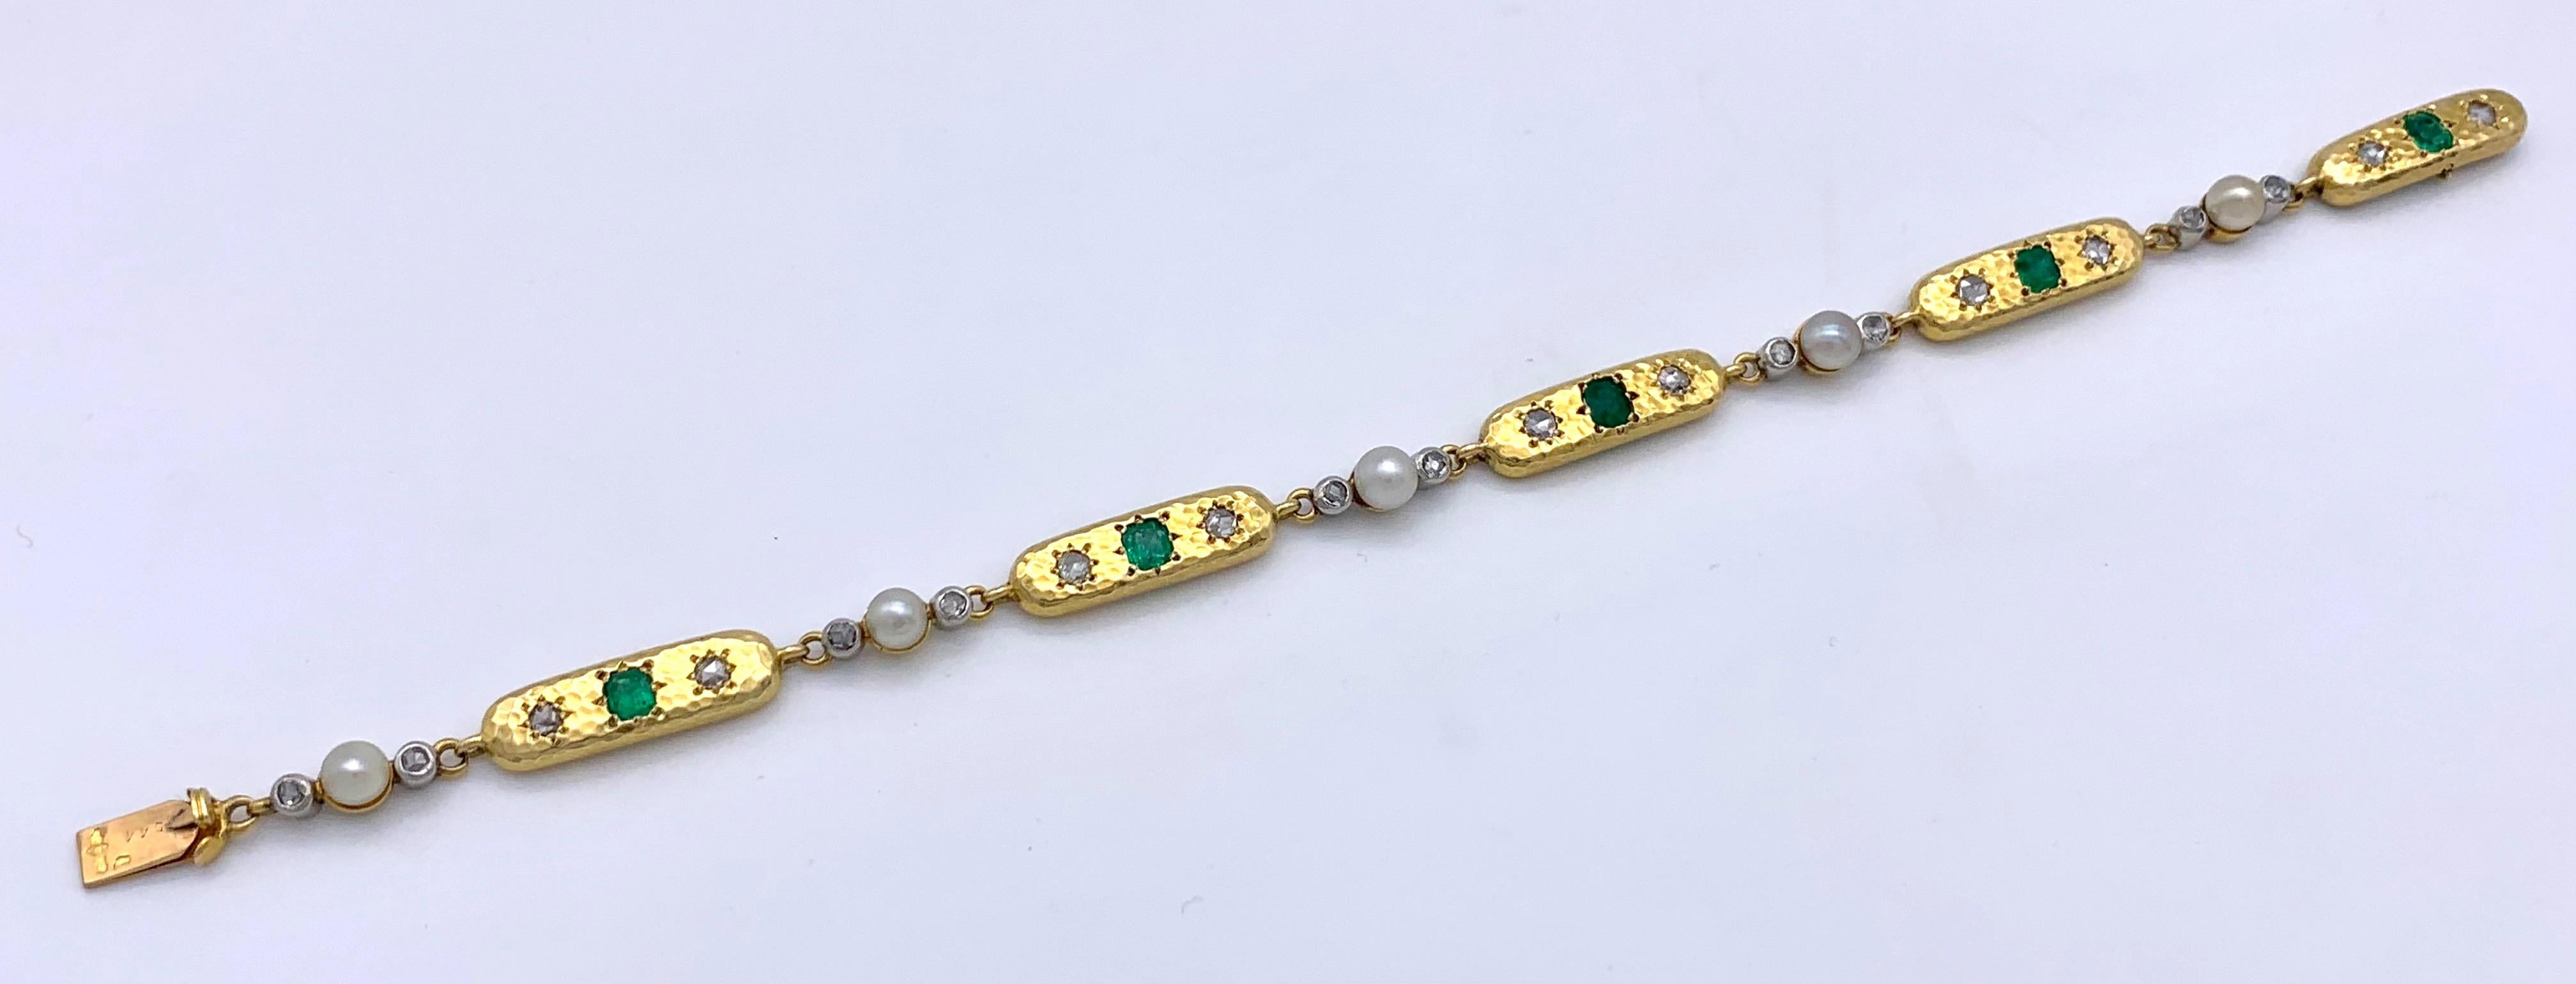 This beautifully made 18 karat gold bracelet has been crafted in France at the very beginning of the 20th century.
Eight oval yellow gold sections, each beautifully hammered, alternate with five segments set with a natural button pearl and two